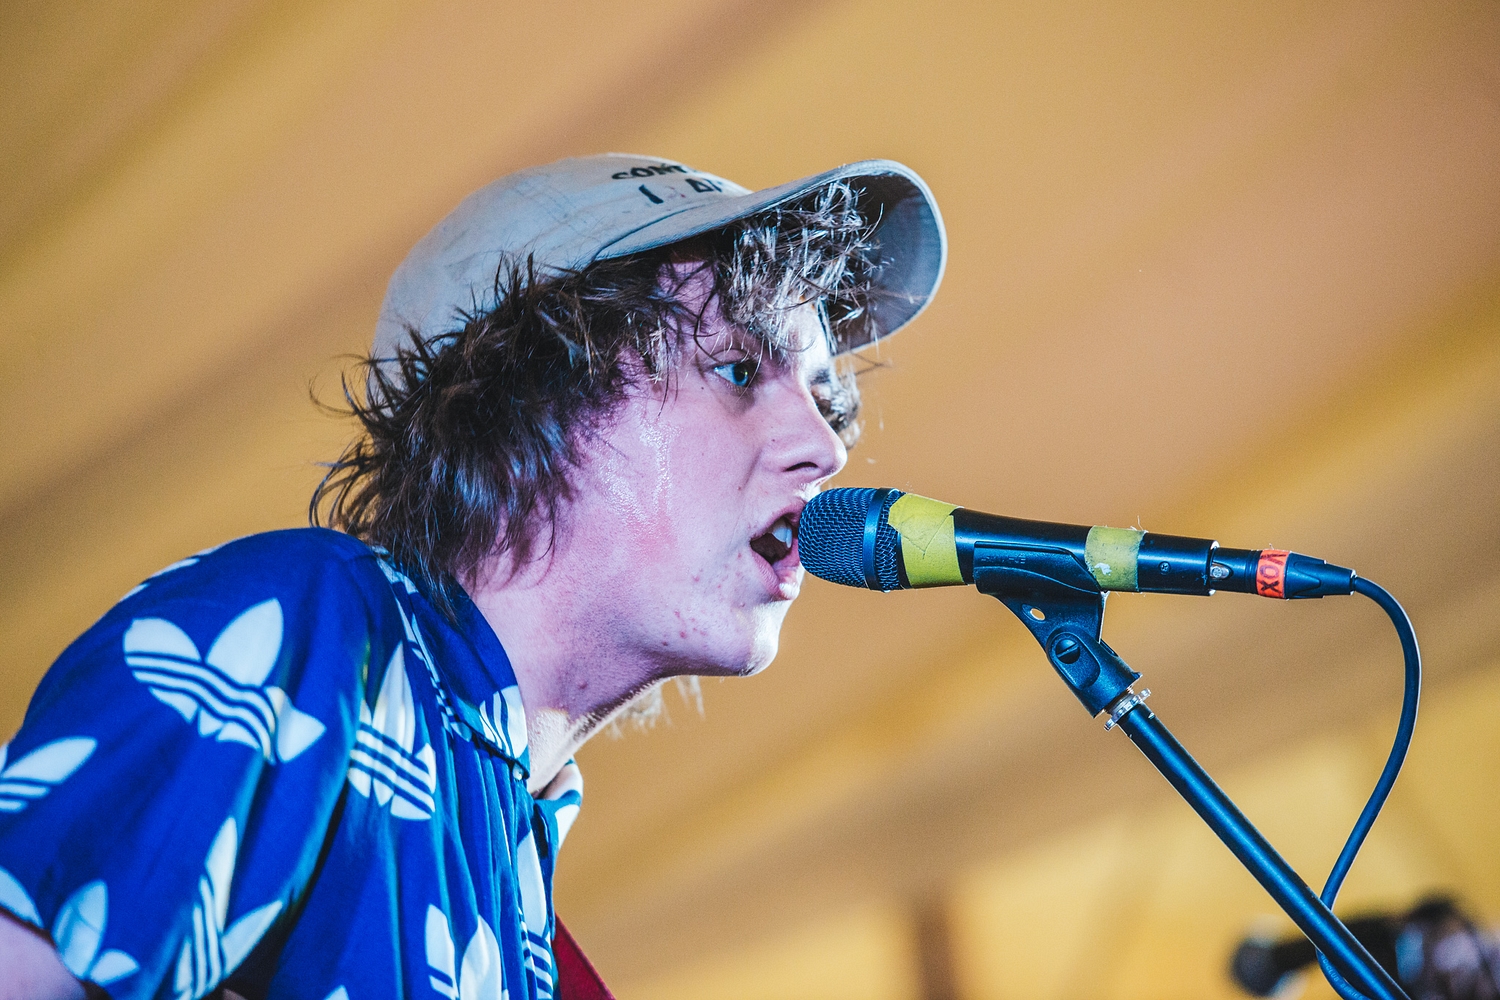 Rat Boy signs on to success at Latitude 2015